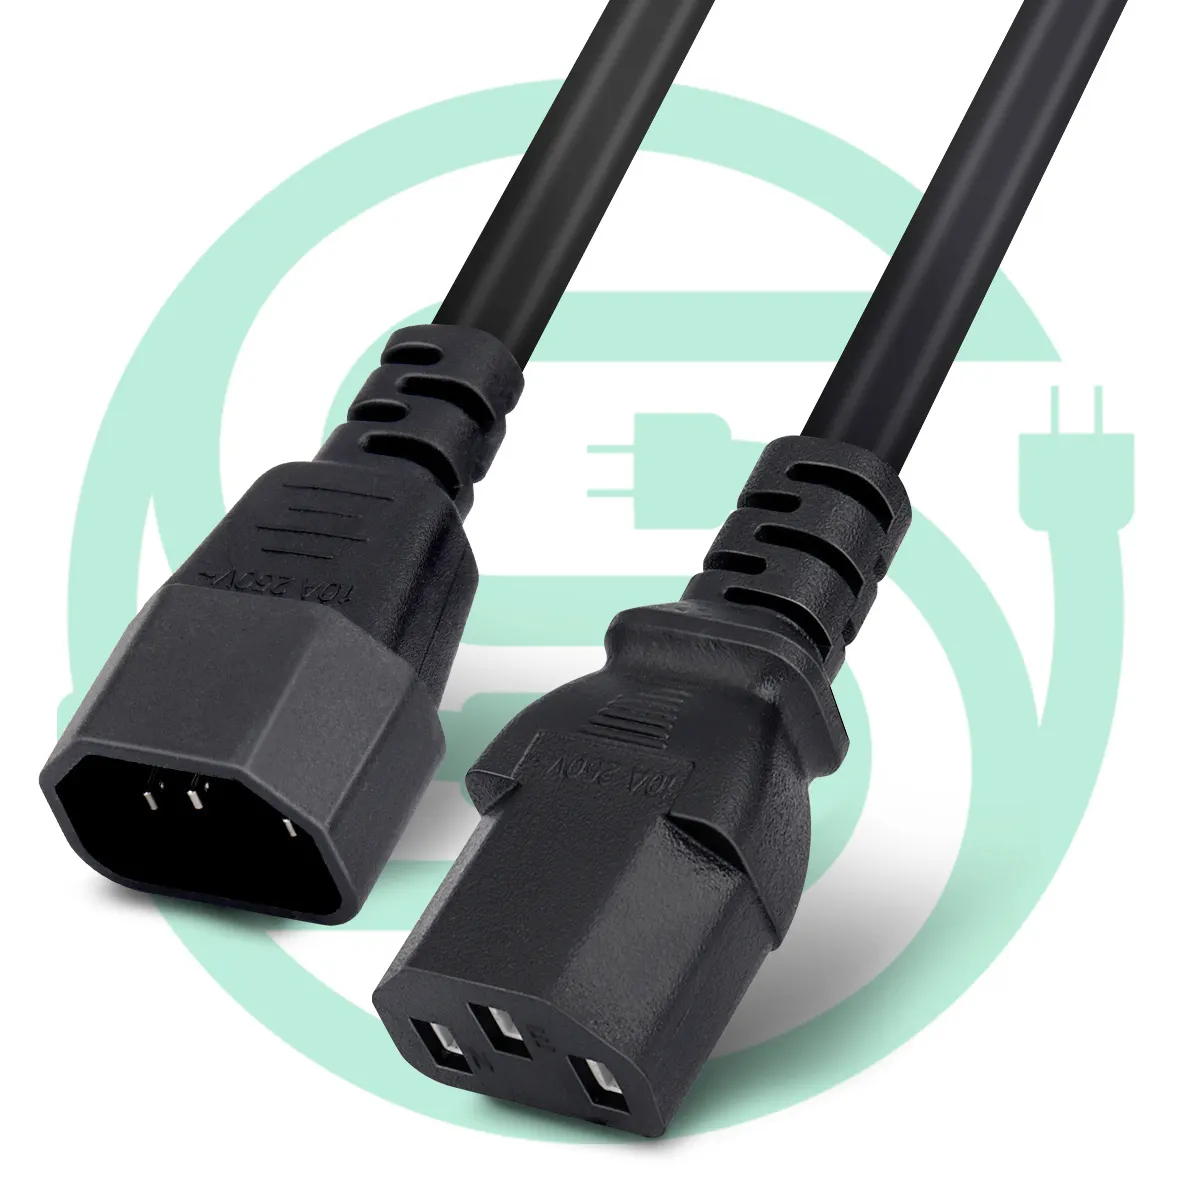 IEC 320 C14 to IEC 320 C13 Black Extension Cord, Power Extension Cable,AC Power Cord